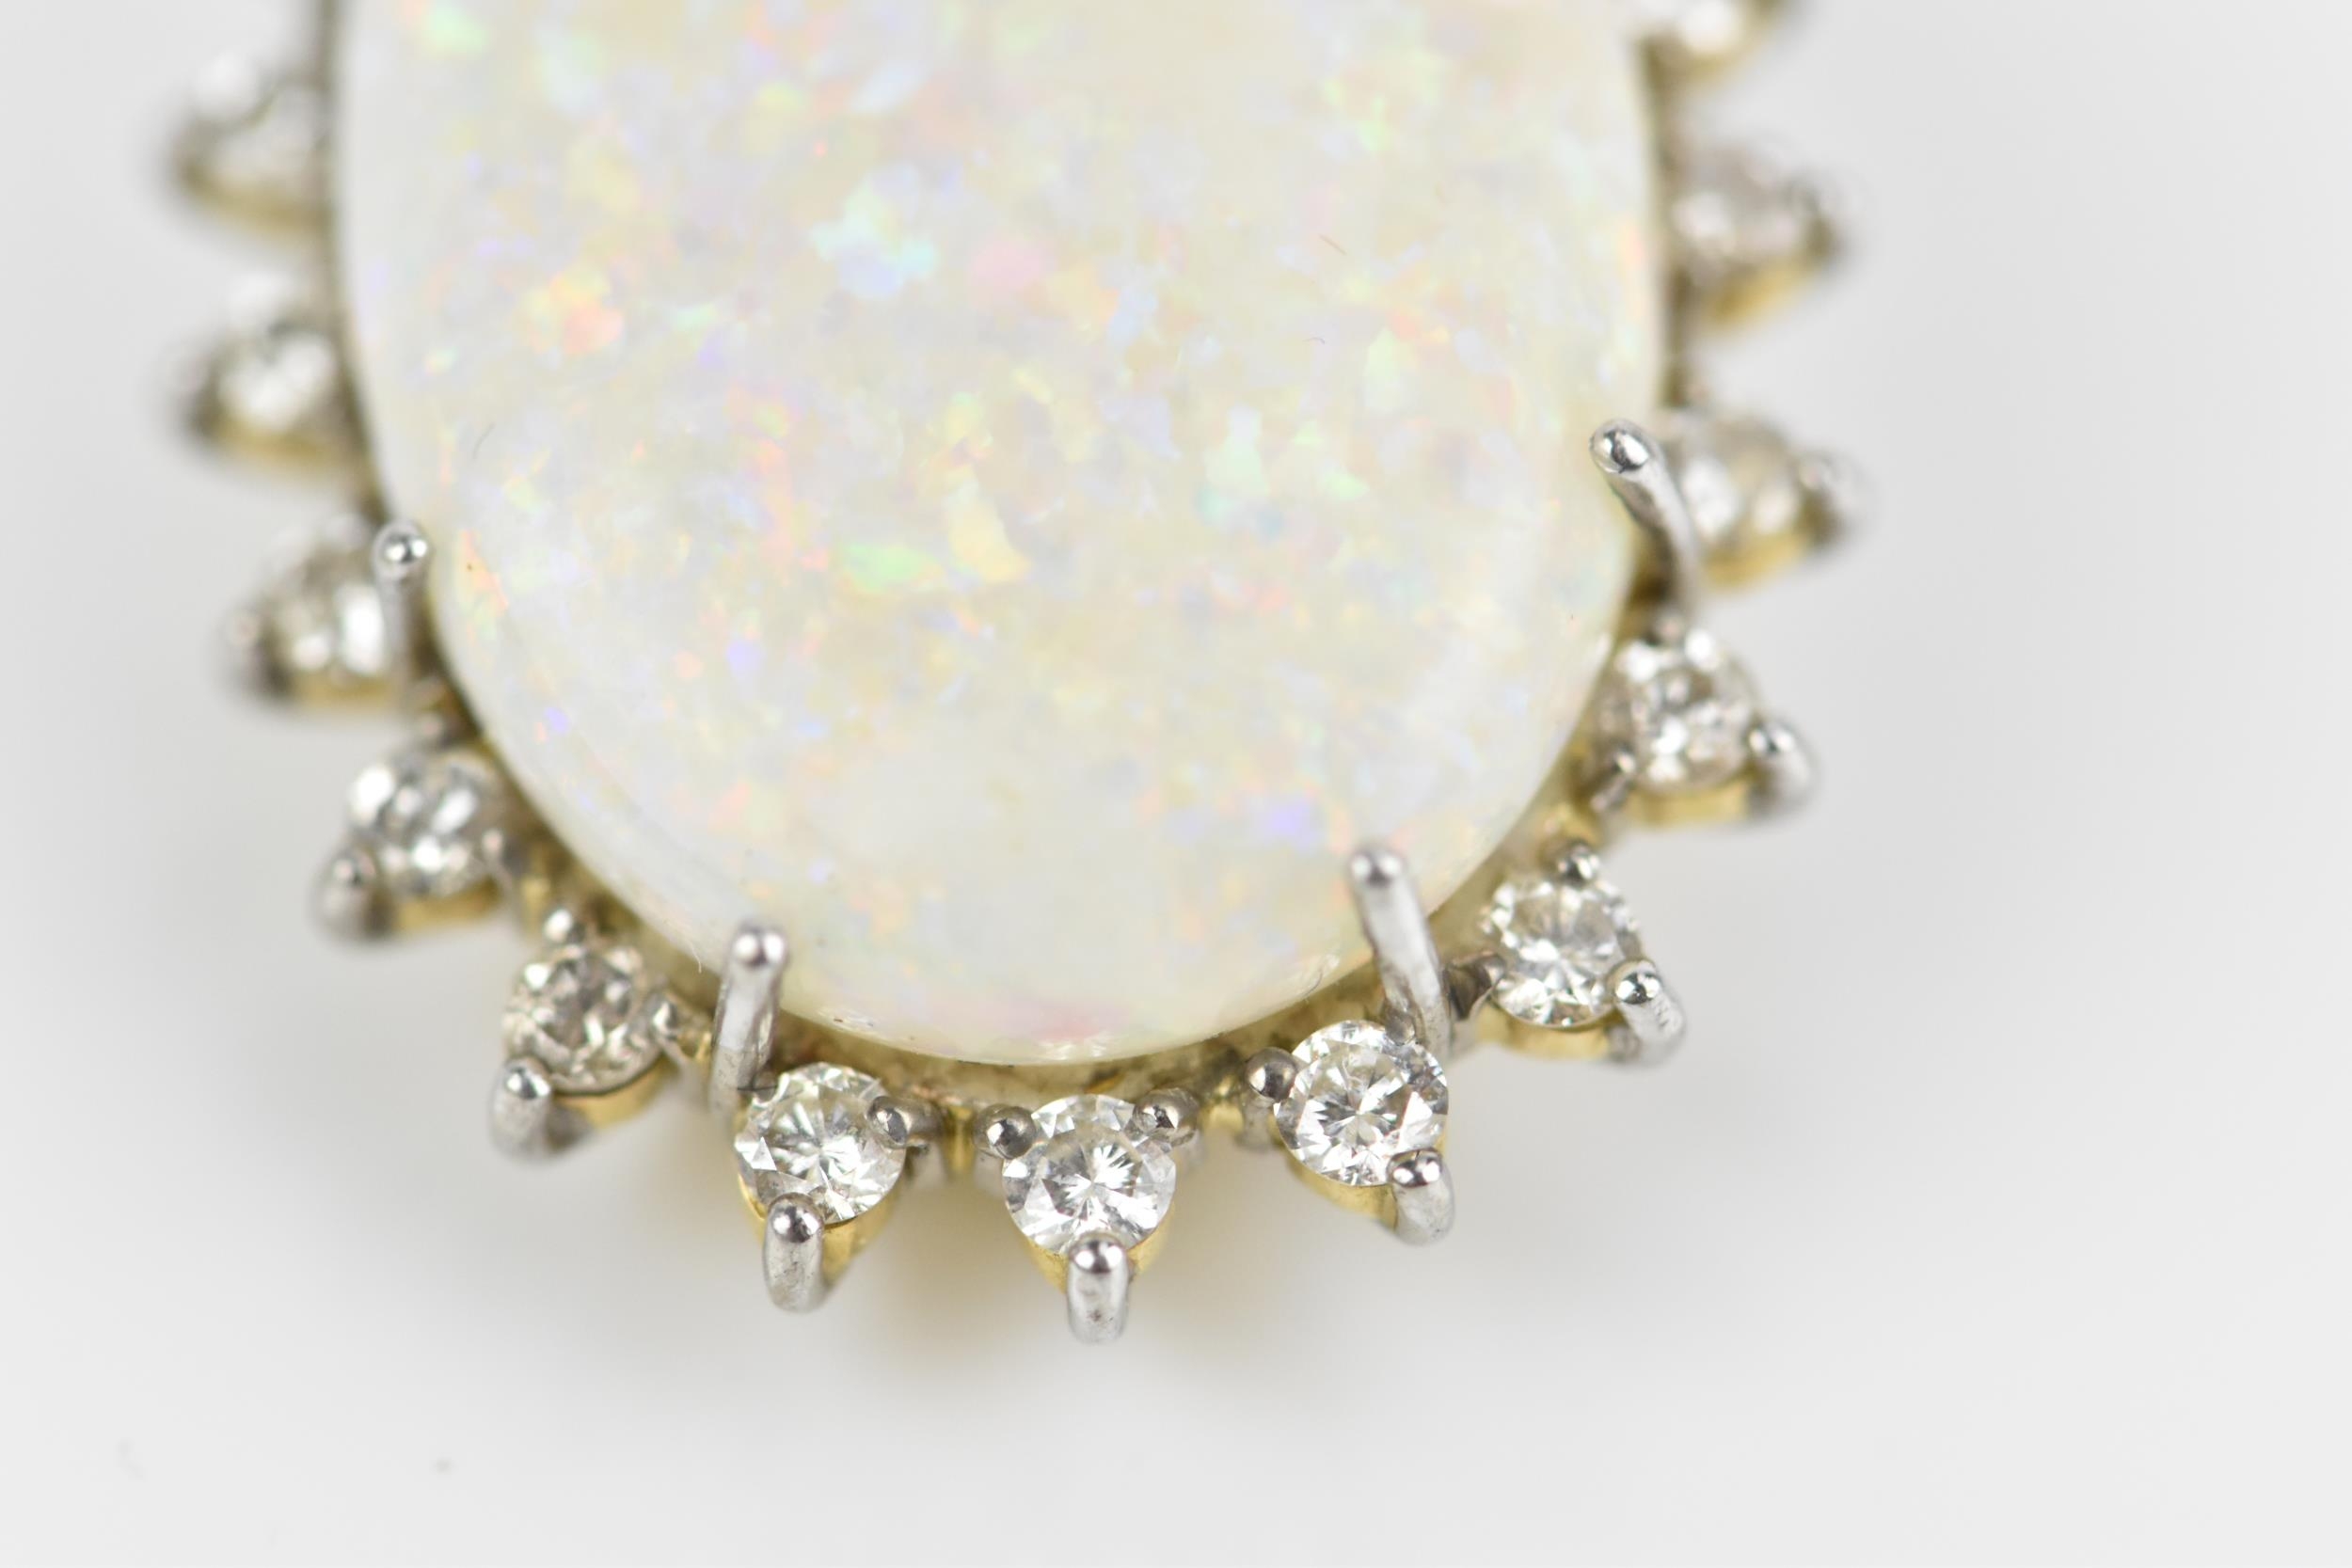 An 18ct yellow gold, white metal, diamond and white opal pendant/brooch, of oval design with central - Image 3 of 6